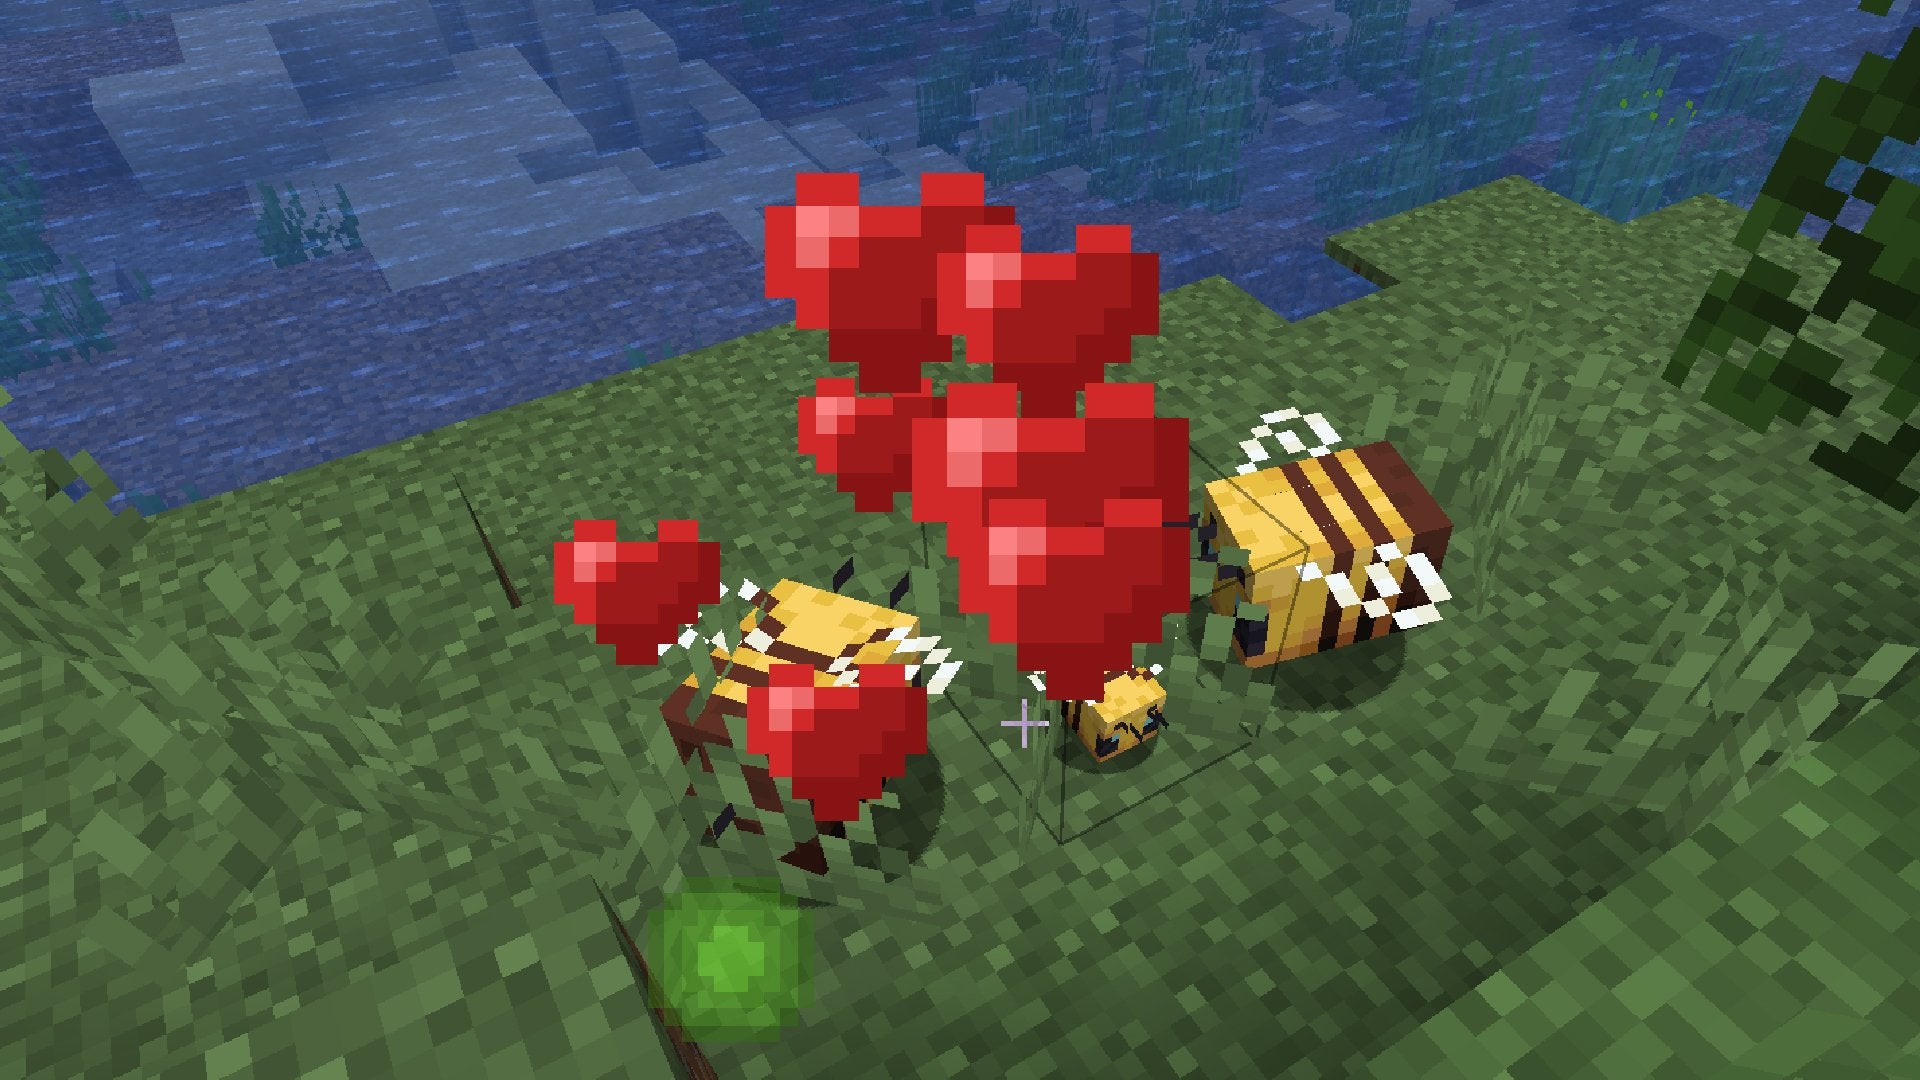 Two adult Bees and a Baby Bee with red heart particles surrounding them in Minecraft.